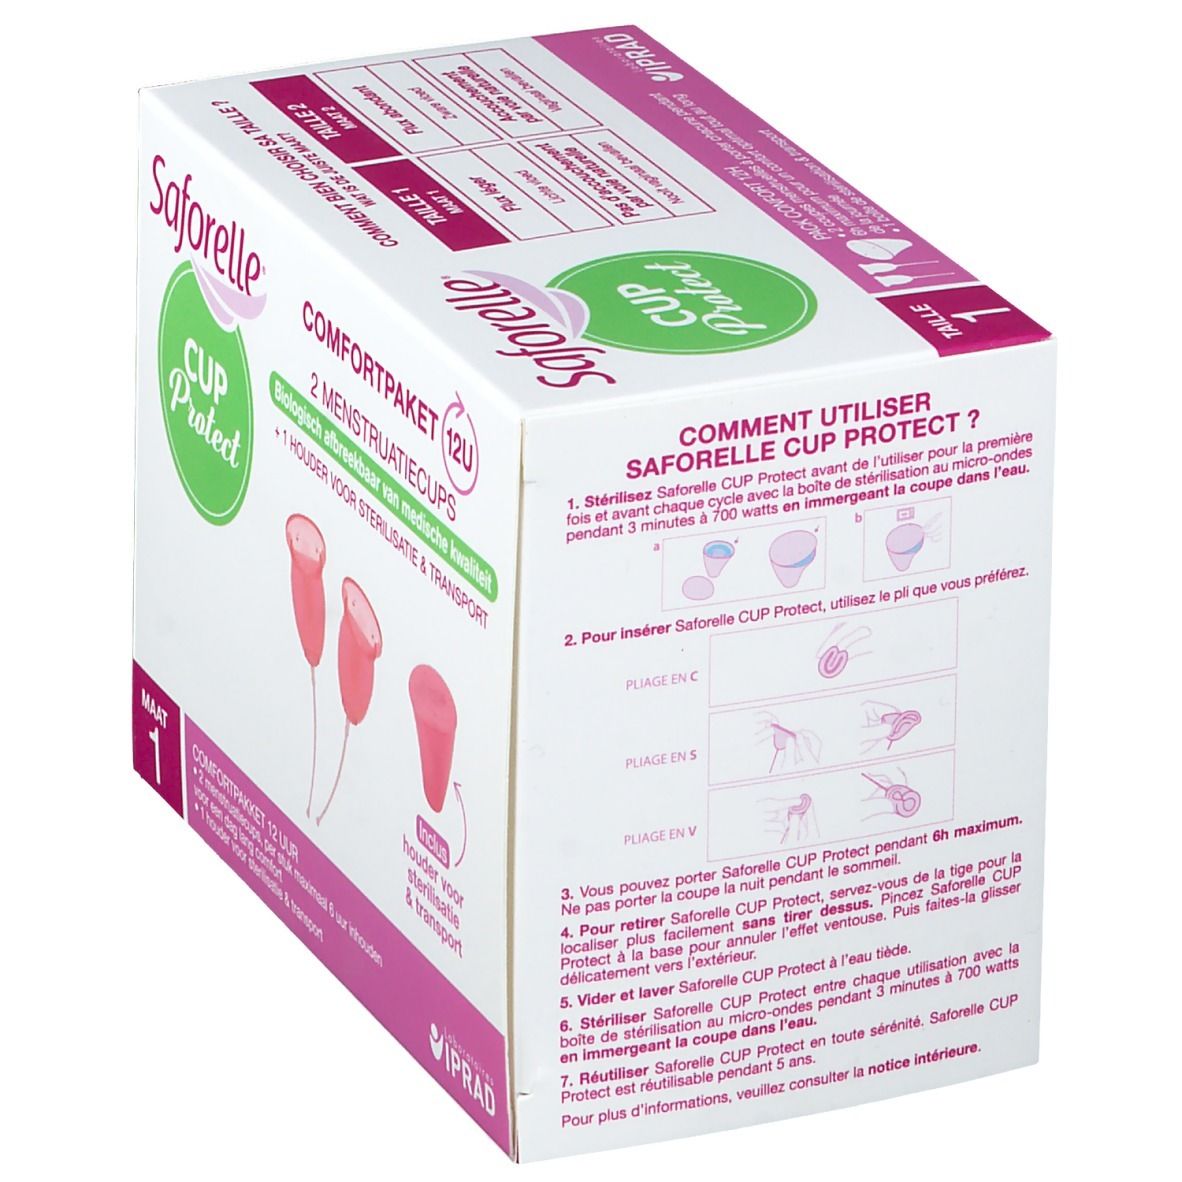 Saforelle® Cup Protect Coupe Menstruelle Taille 1